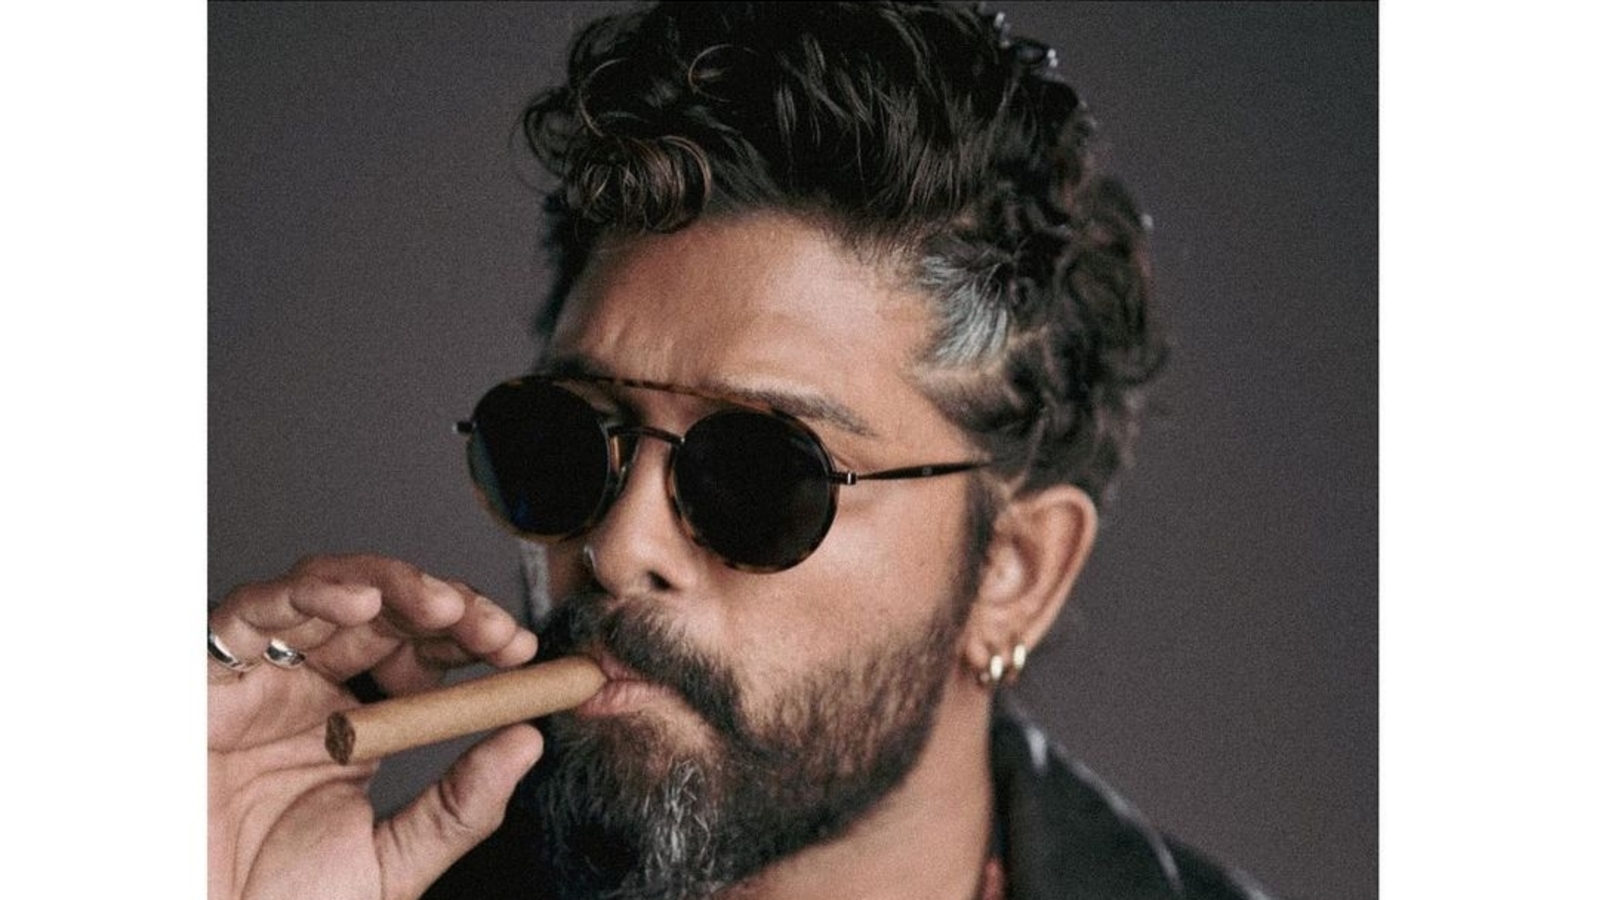 Allu Arjun shares pic with cigar, fans ask if it's his look from Pushpa sequel